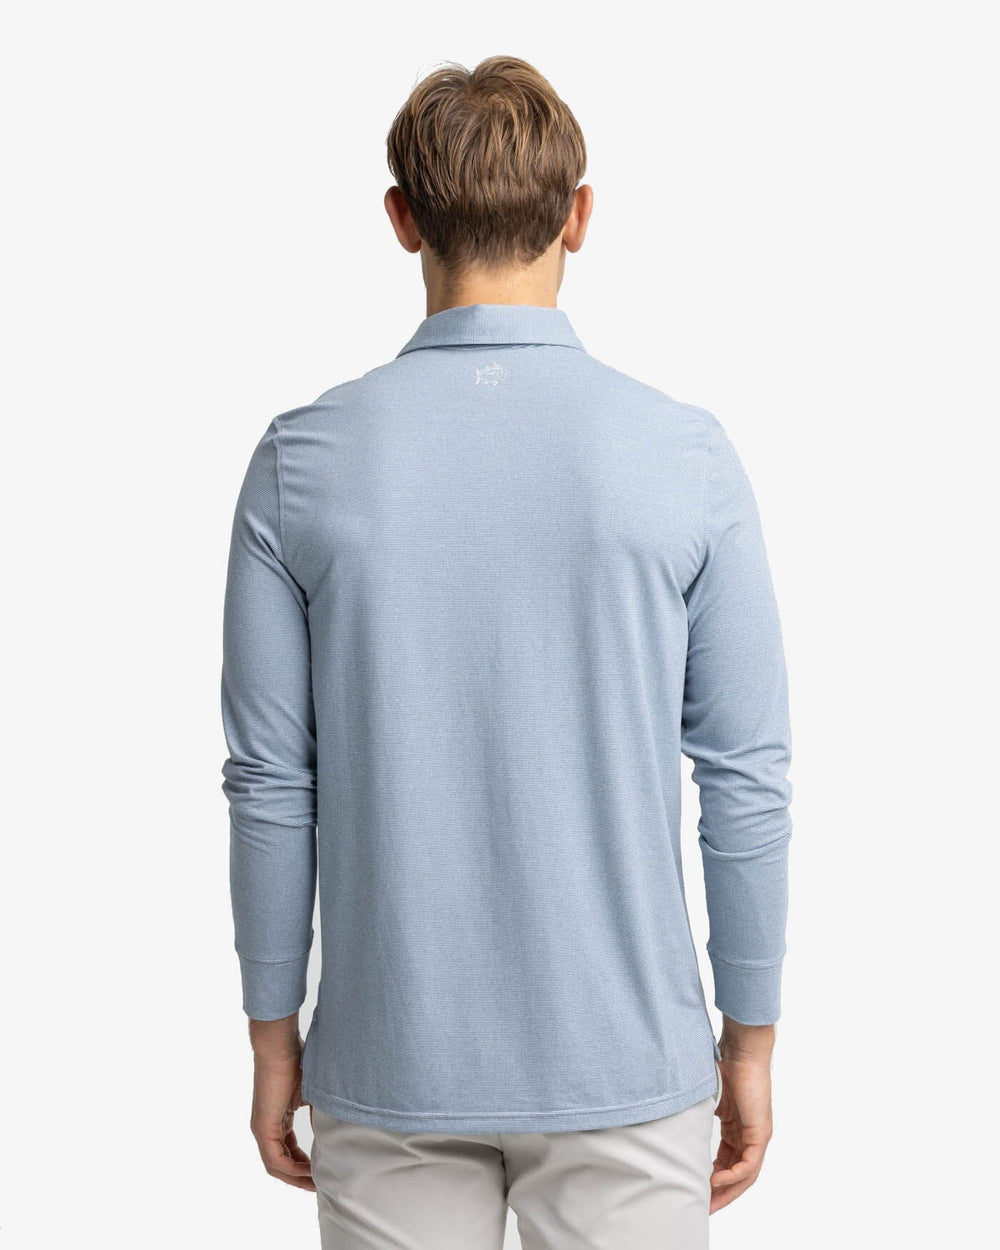 The back view of the Southern Tide Ryder Heather Ridgeway Stripe Long Sleeve Performance Polo by Southern Tide - Heather Dress Blue